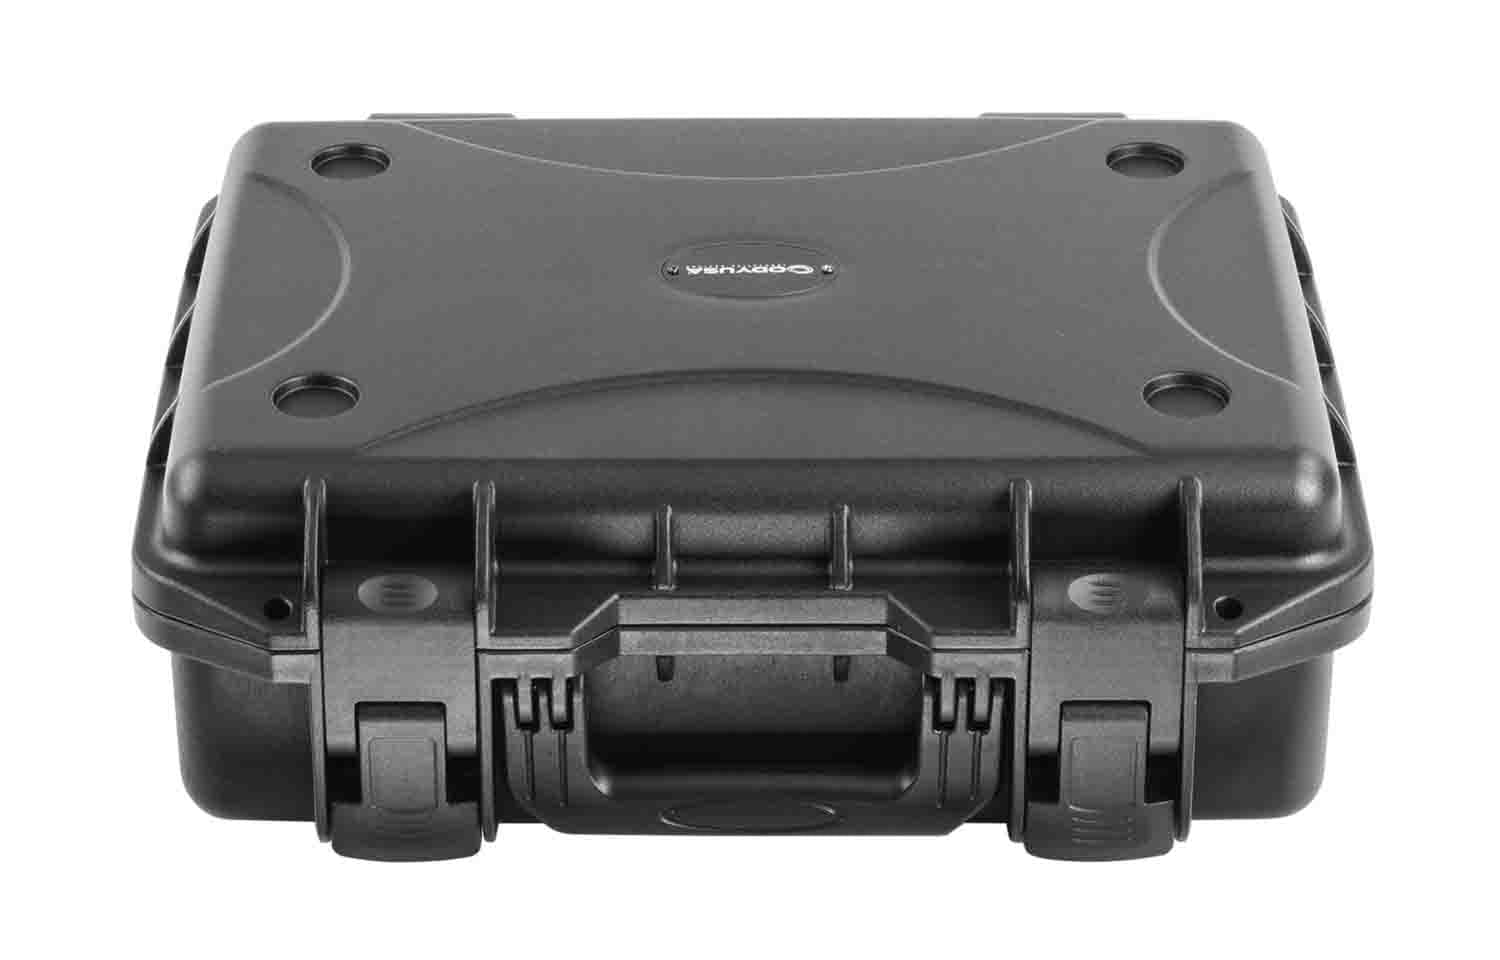 Odyssey VU151005 Vulcan Injection-Molded Utility Case with Pluck Foam - 15.25 x 10.5 x 3.5" Interior - Hollywood DJ